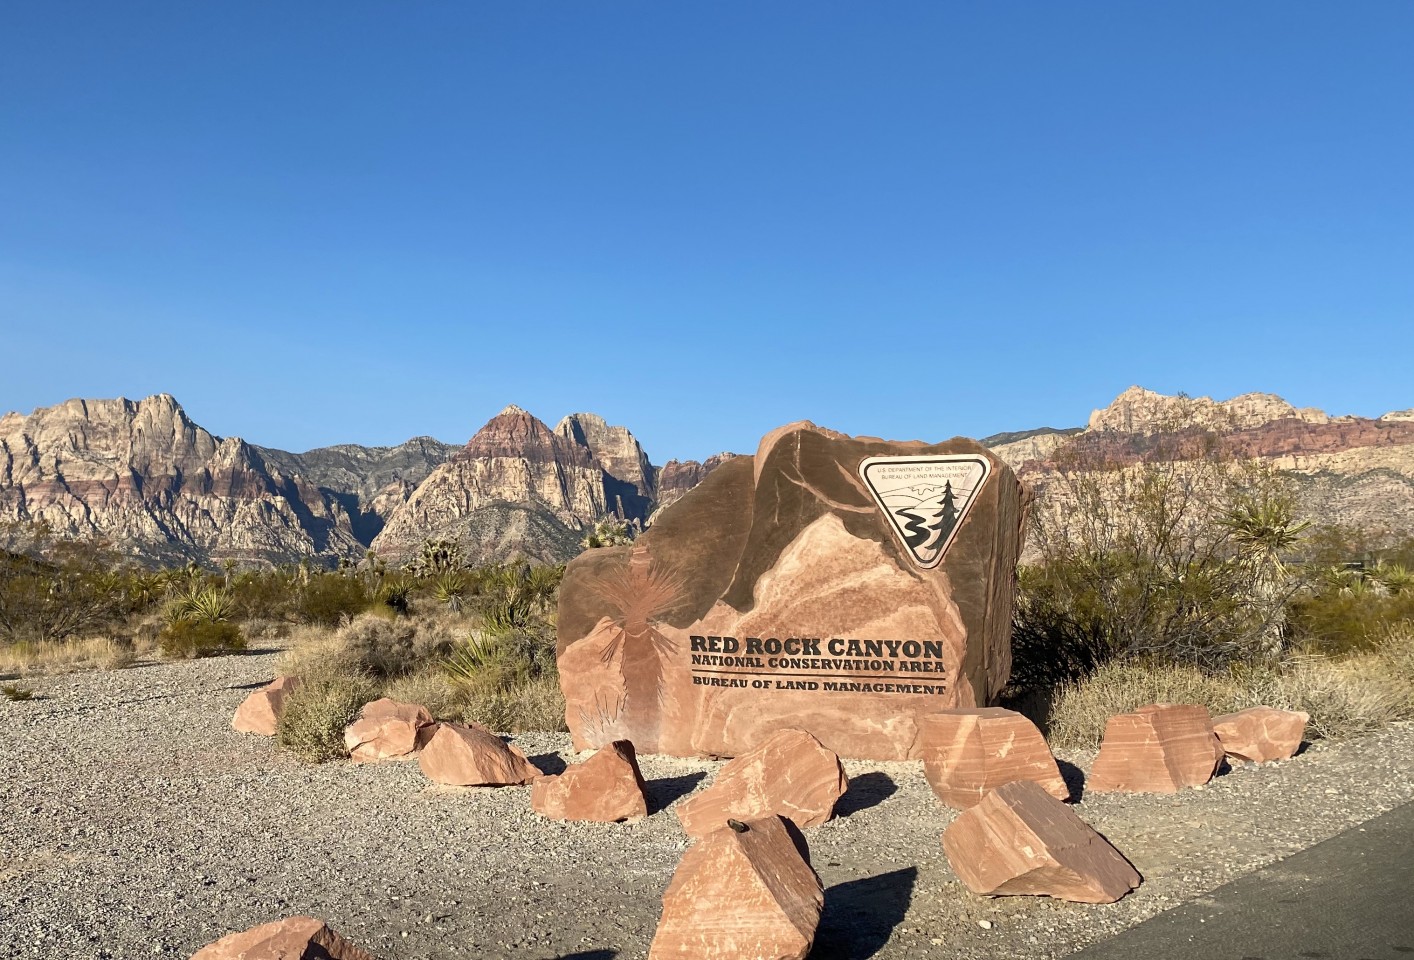 Red Rock Canyon State Park（レッドロックキャニオン州立公園）